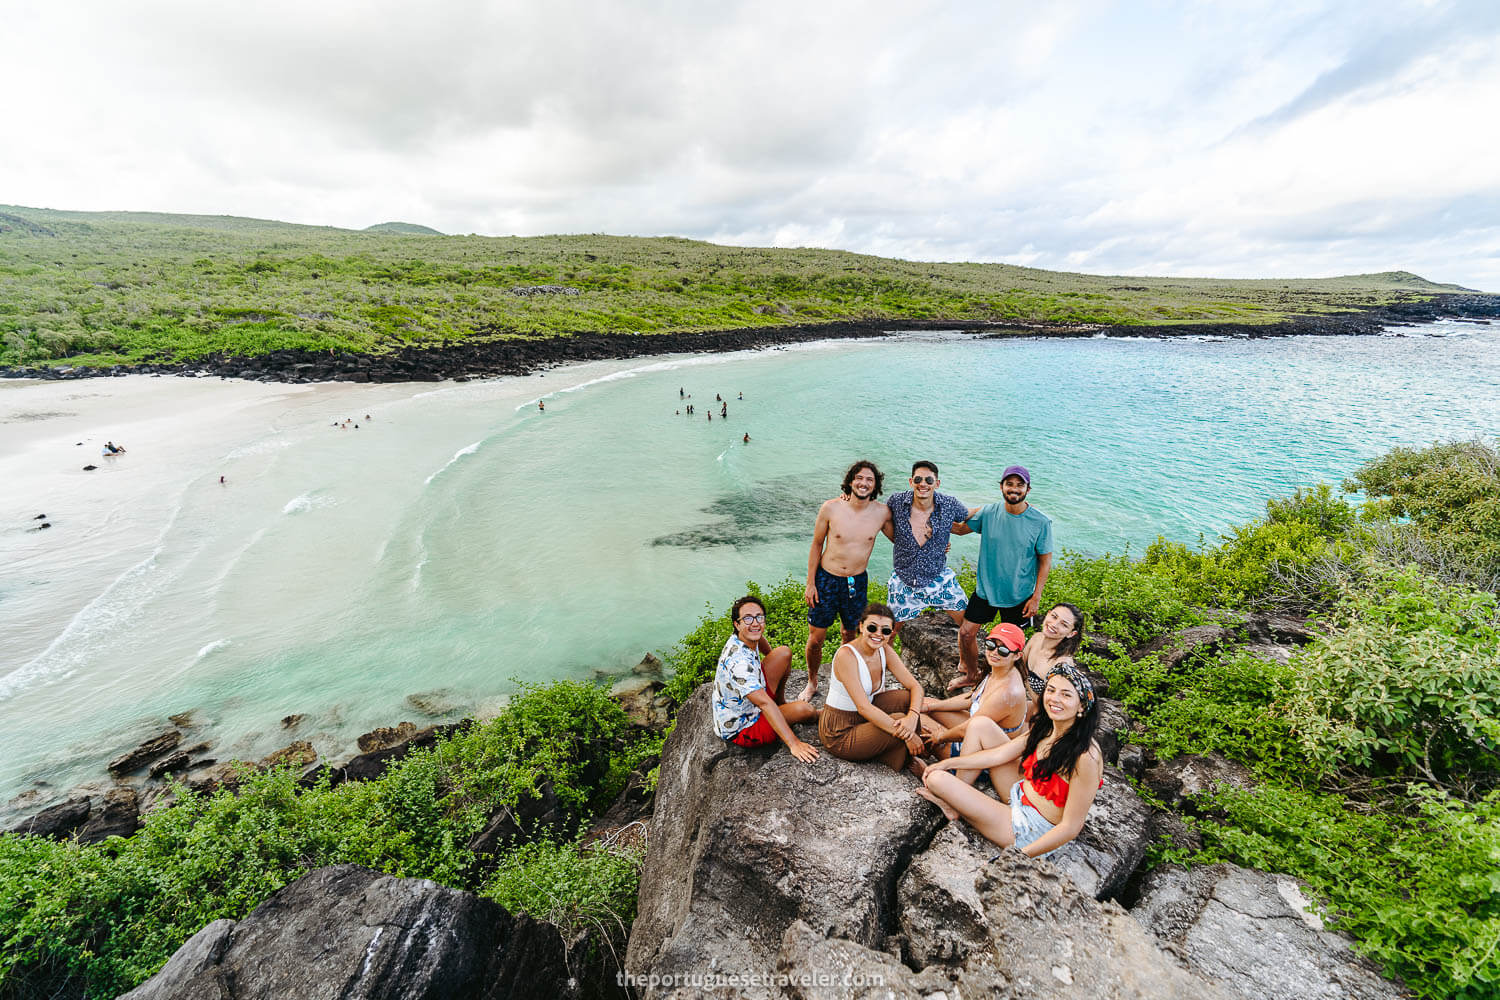 My friends at Puerto Chino beach viewpoint in San Cristobal, Galapagos